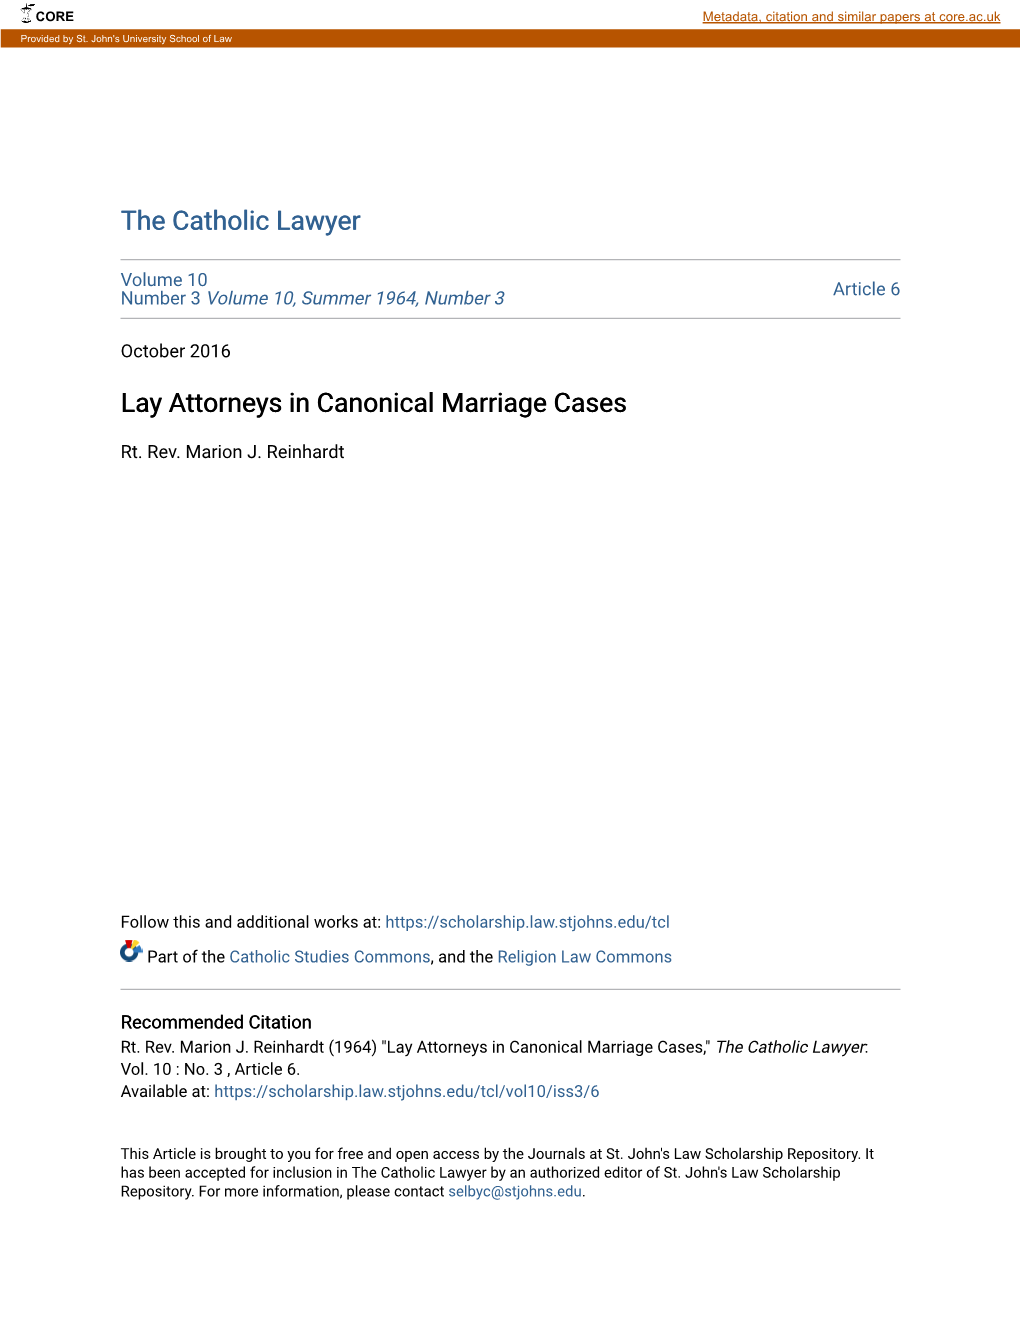 Lay Attorneys in Canonical Marriage Cases